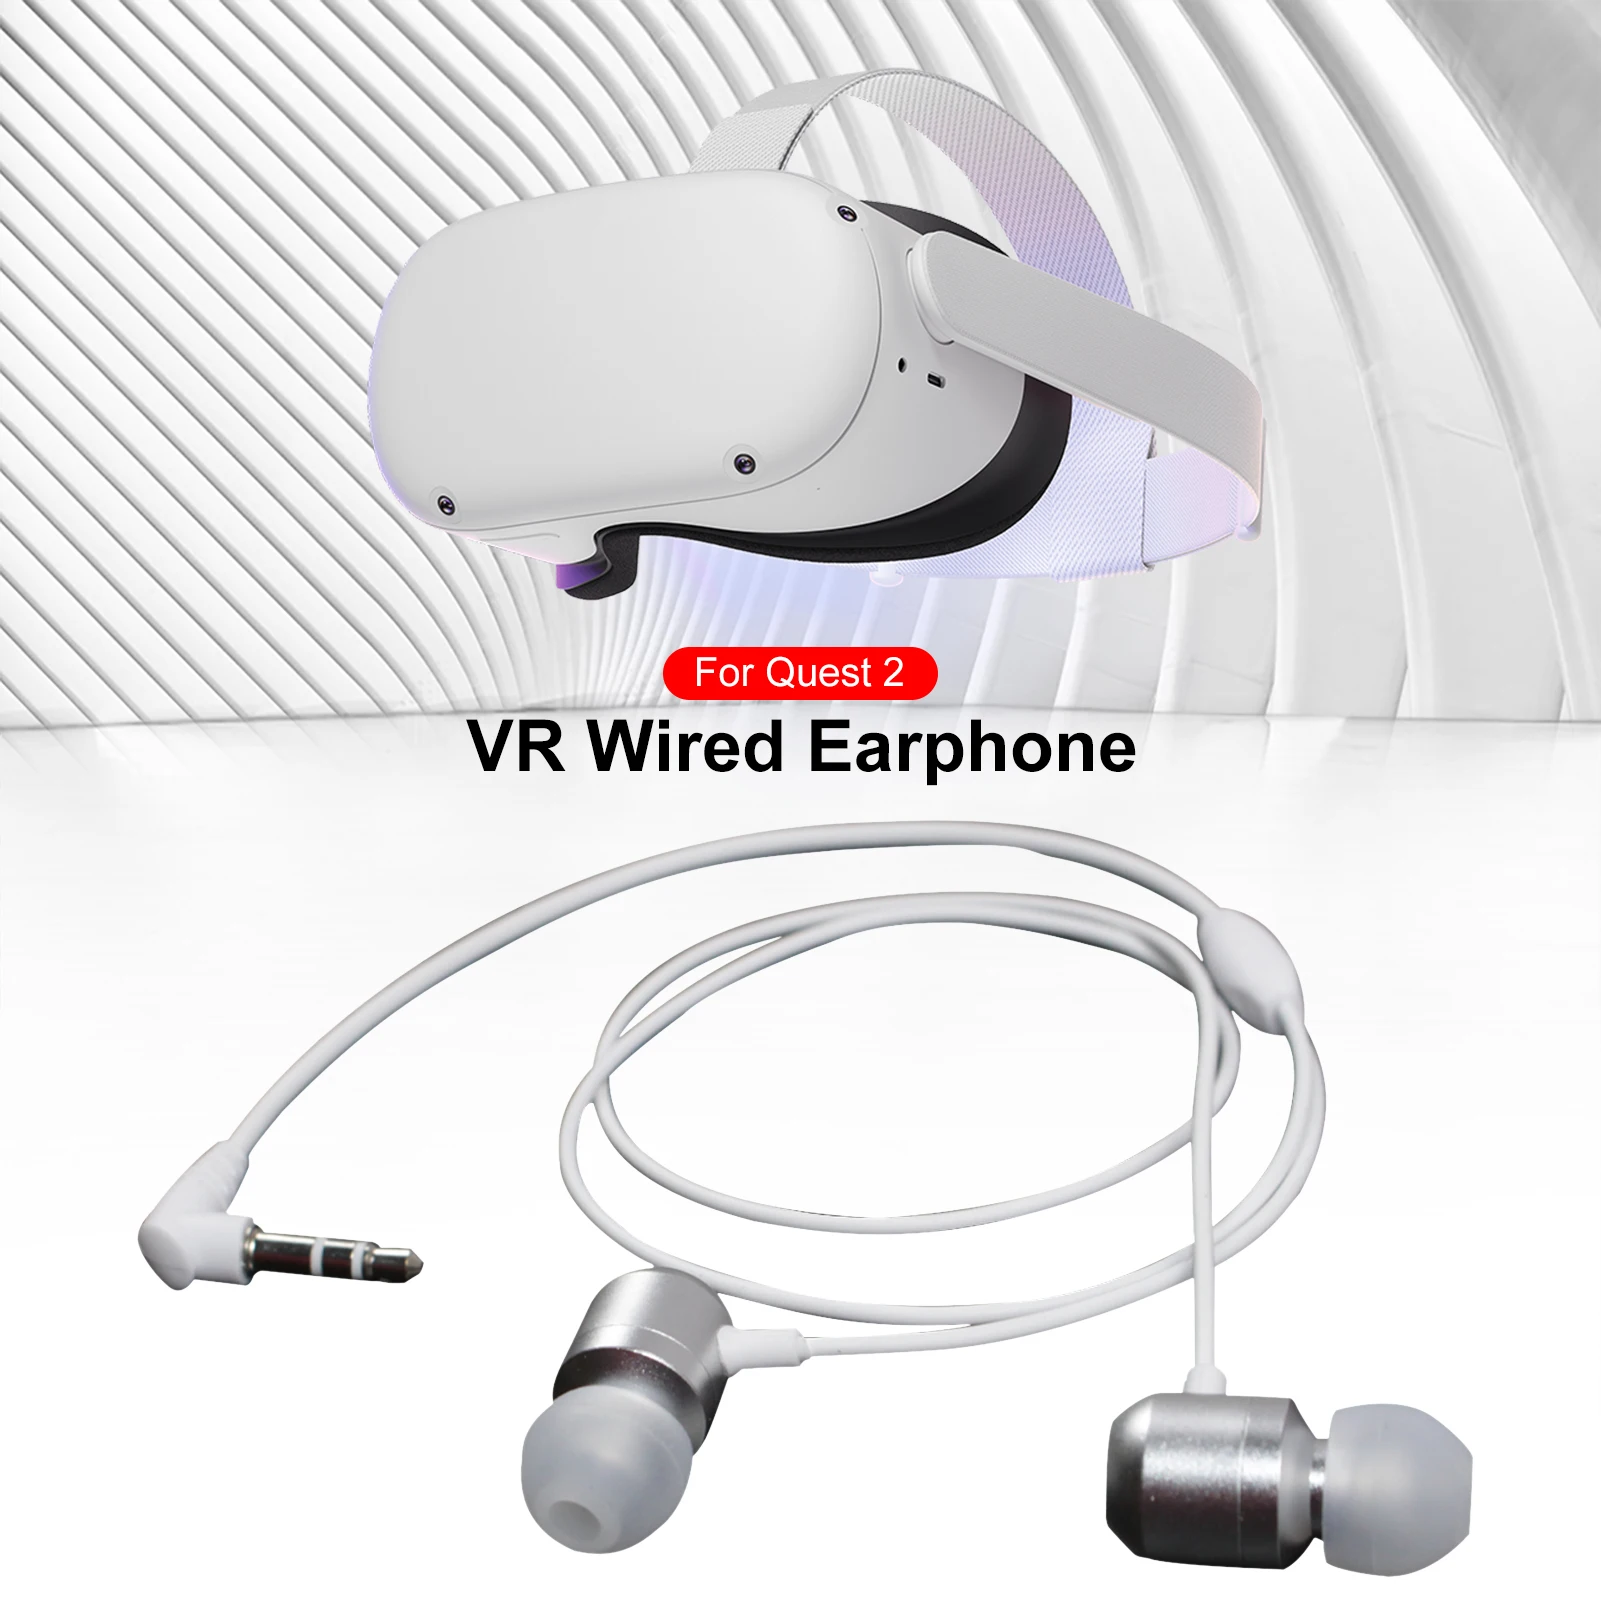 

VR Earphones Ear-in Integrated Earphone For Oculus Quest 2 Gaming Headsets Unique Earhook Earpieces For Quest 2 VR Accessories